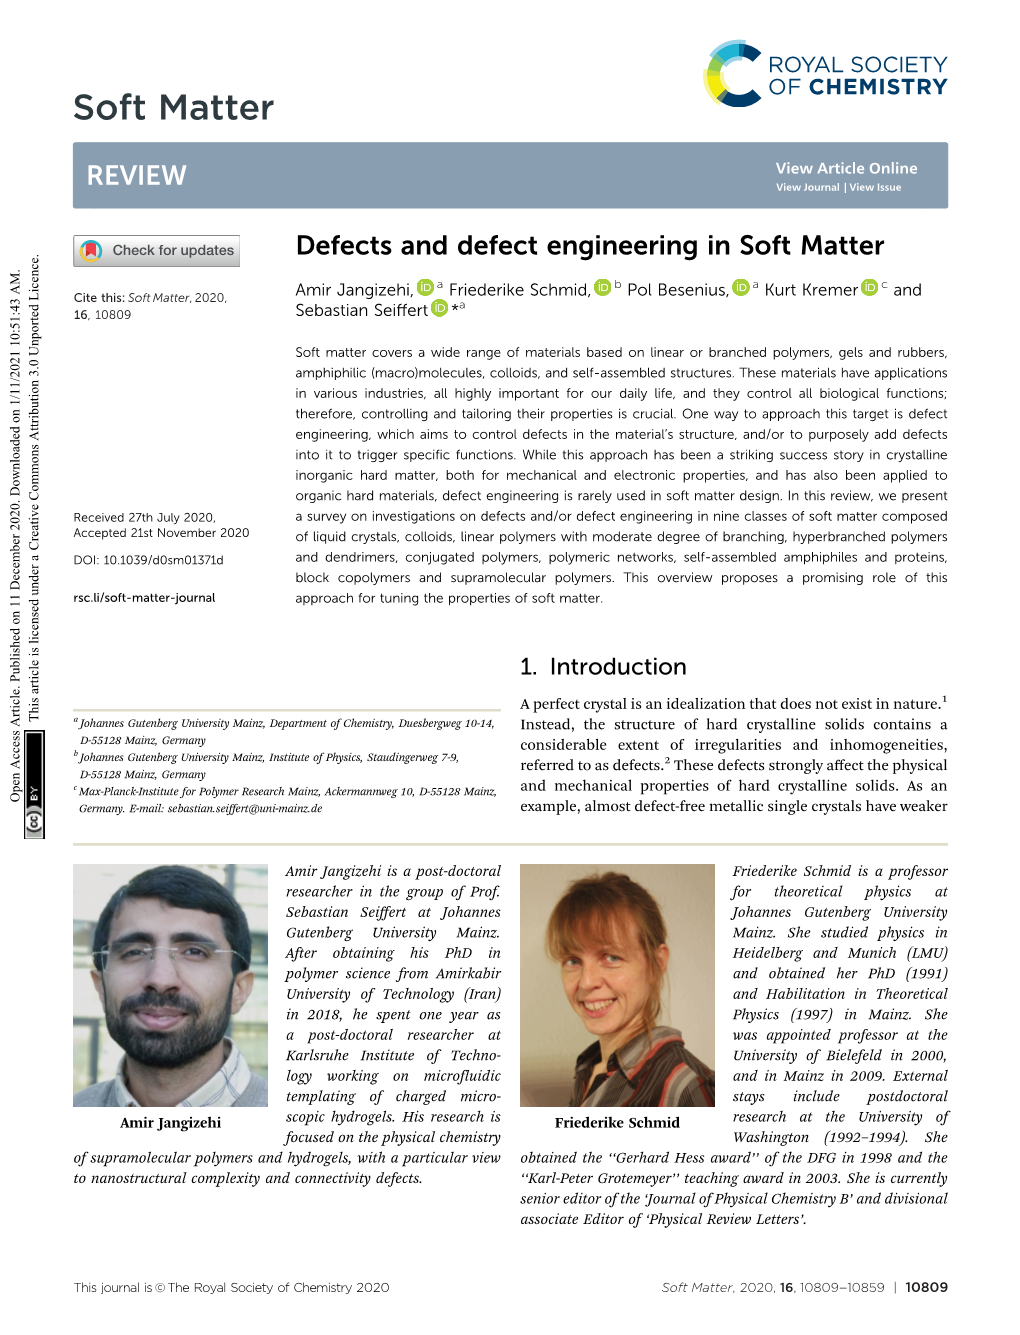 Defects and Defect Engineering in Soft Matter